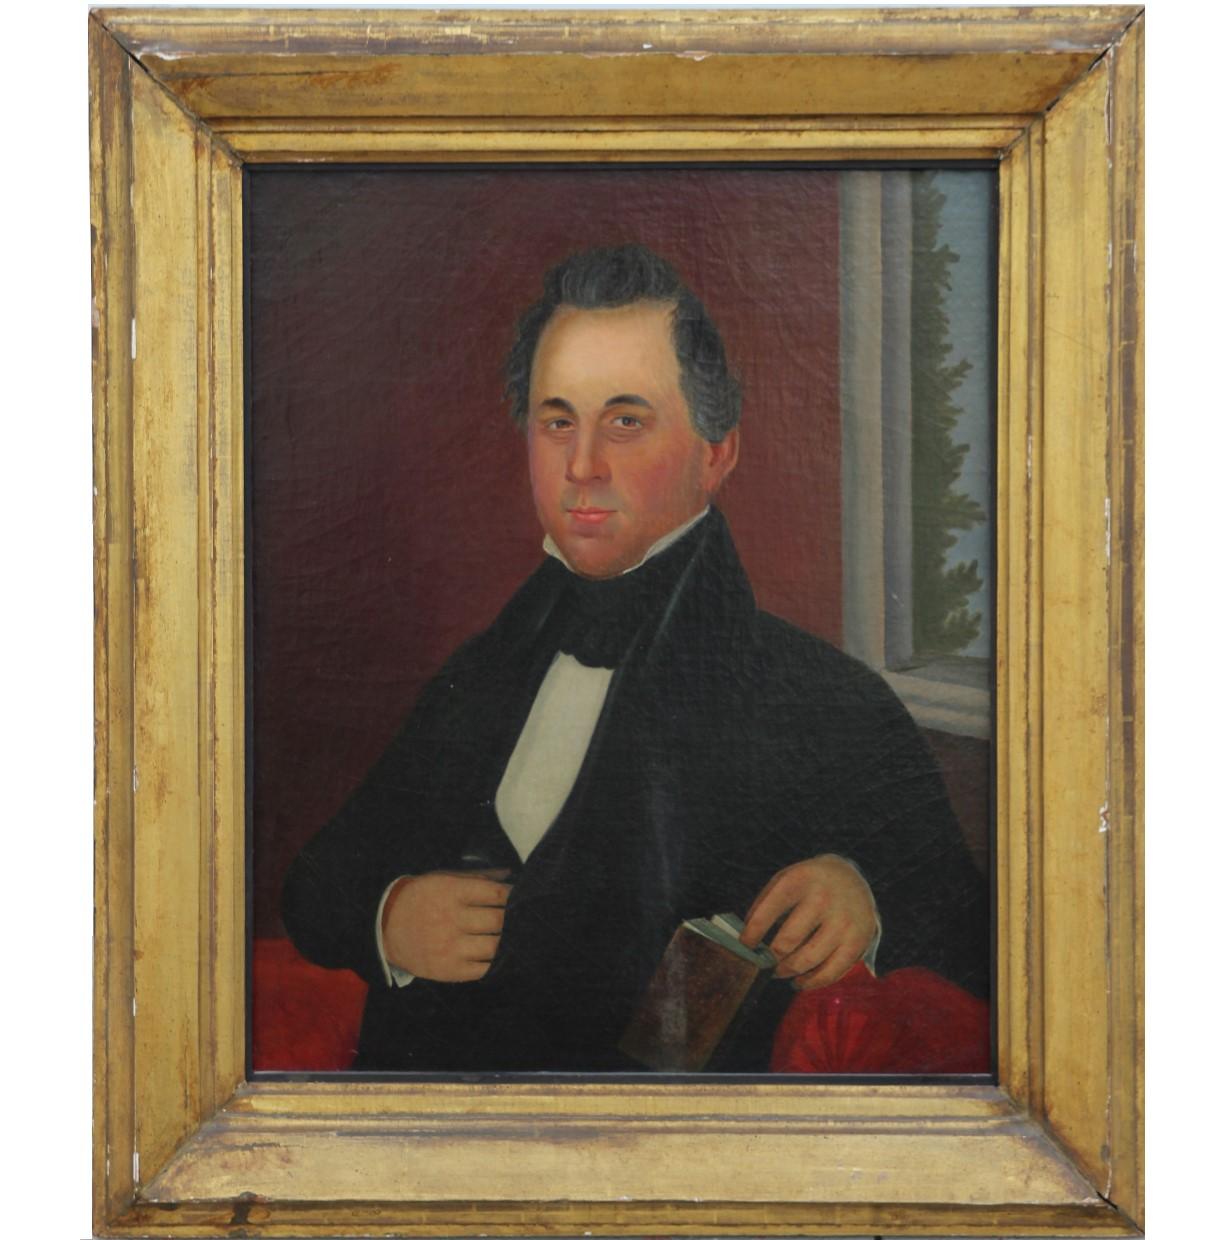 Unknown Figurative Painting - Early 19th Century American Portrait of a Man